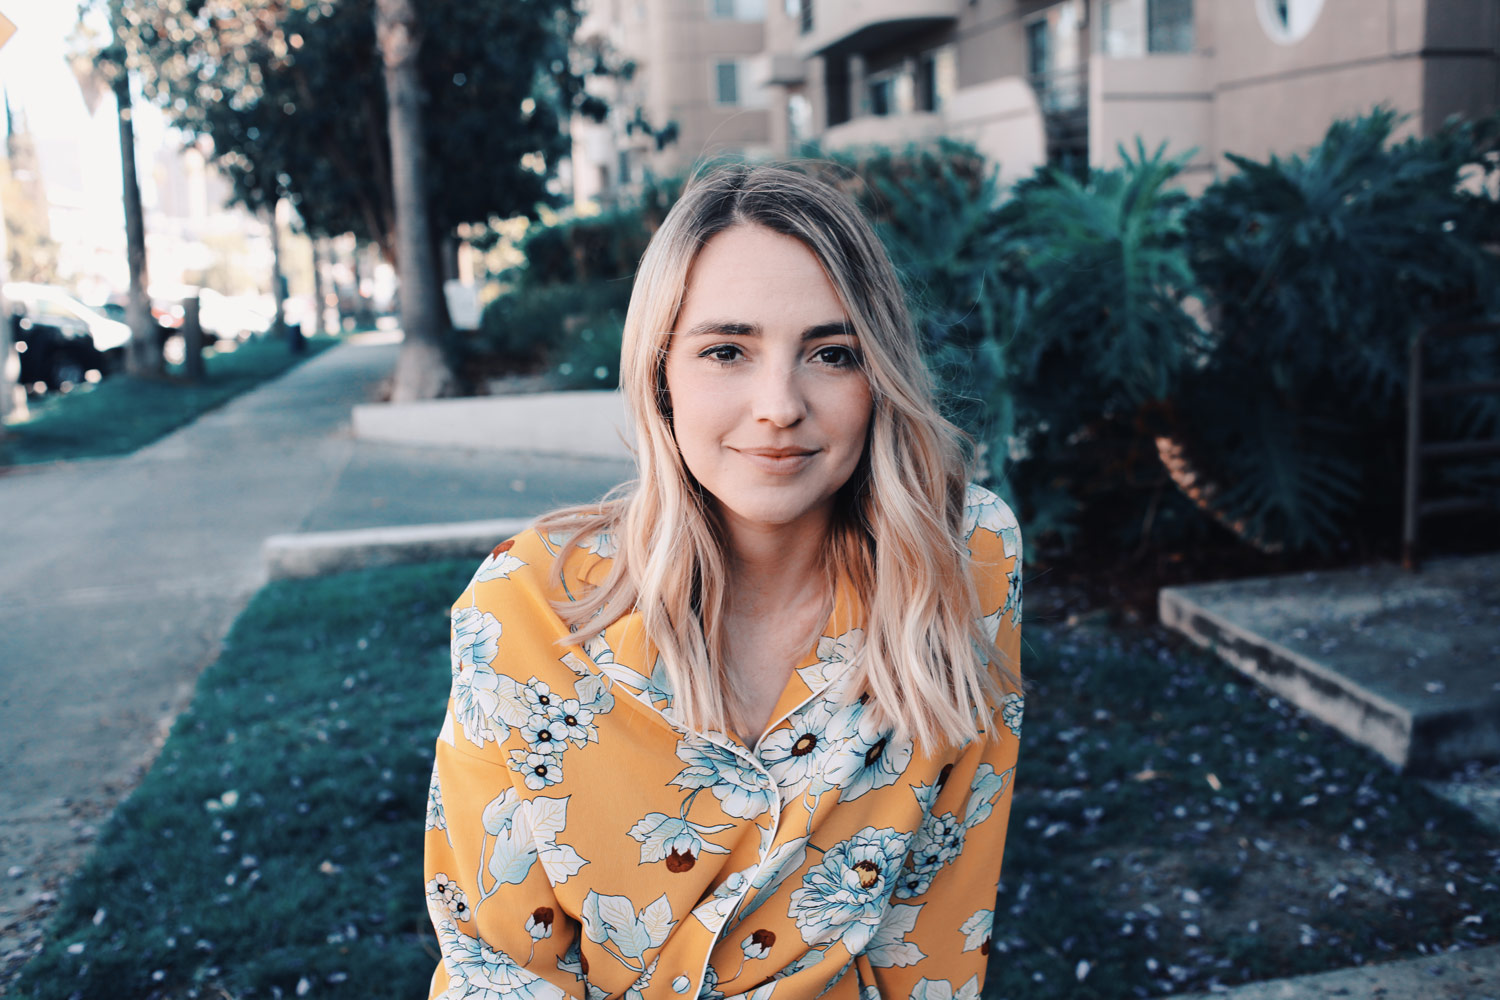 Katelyn Tarver talks music, challenges, moving to LA and acting - C-Heads M...